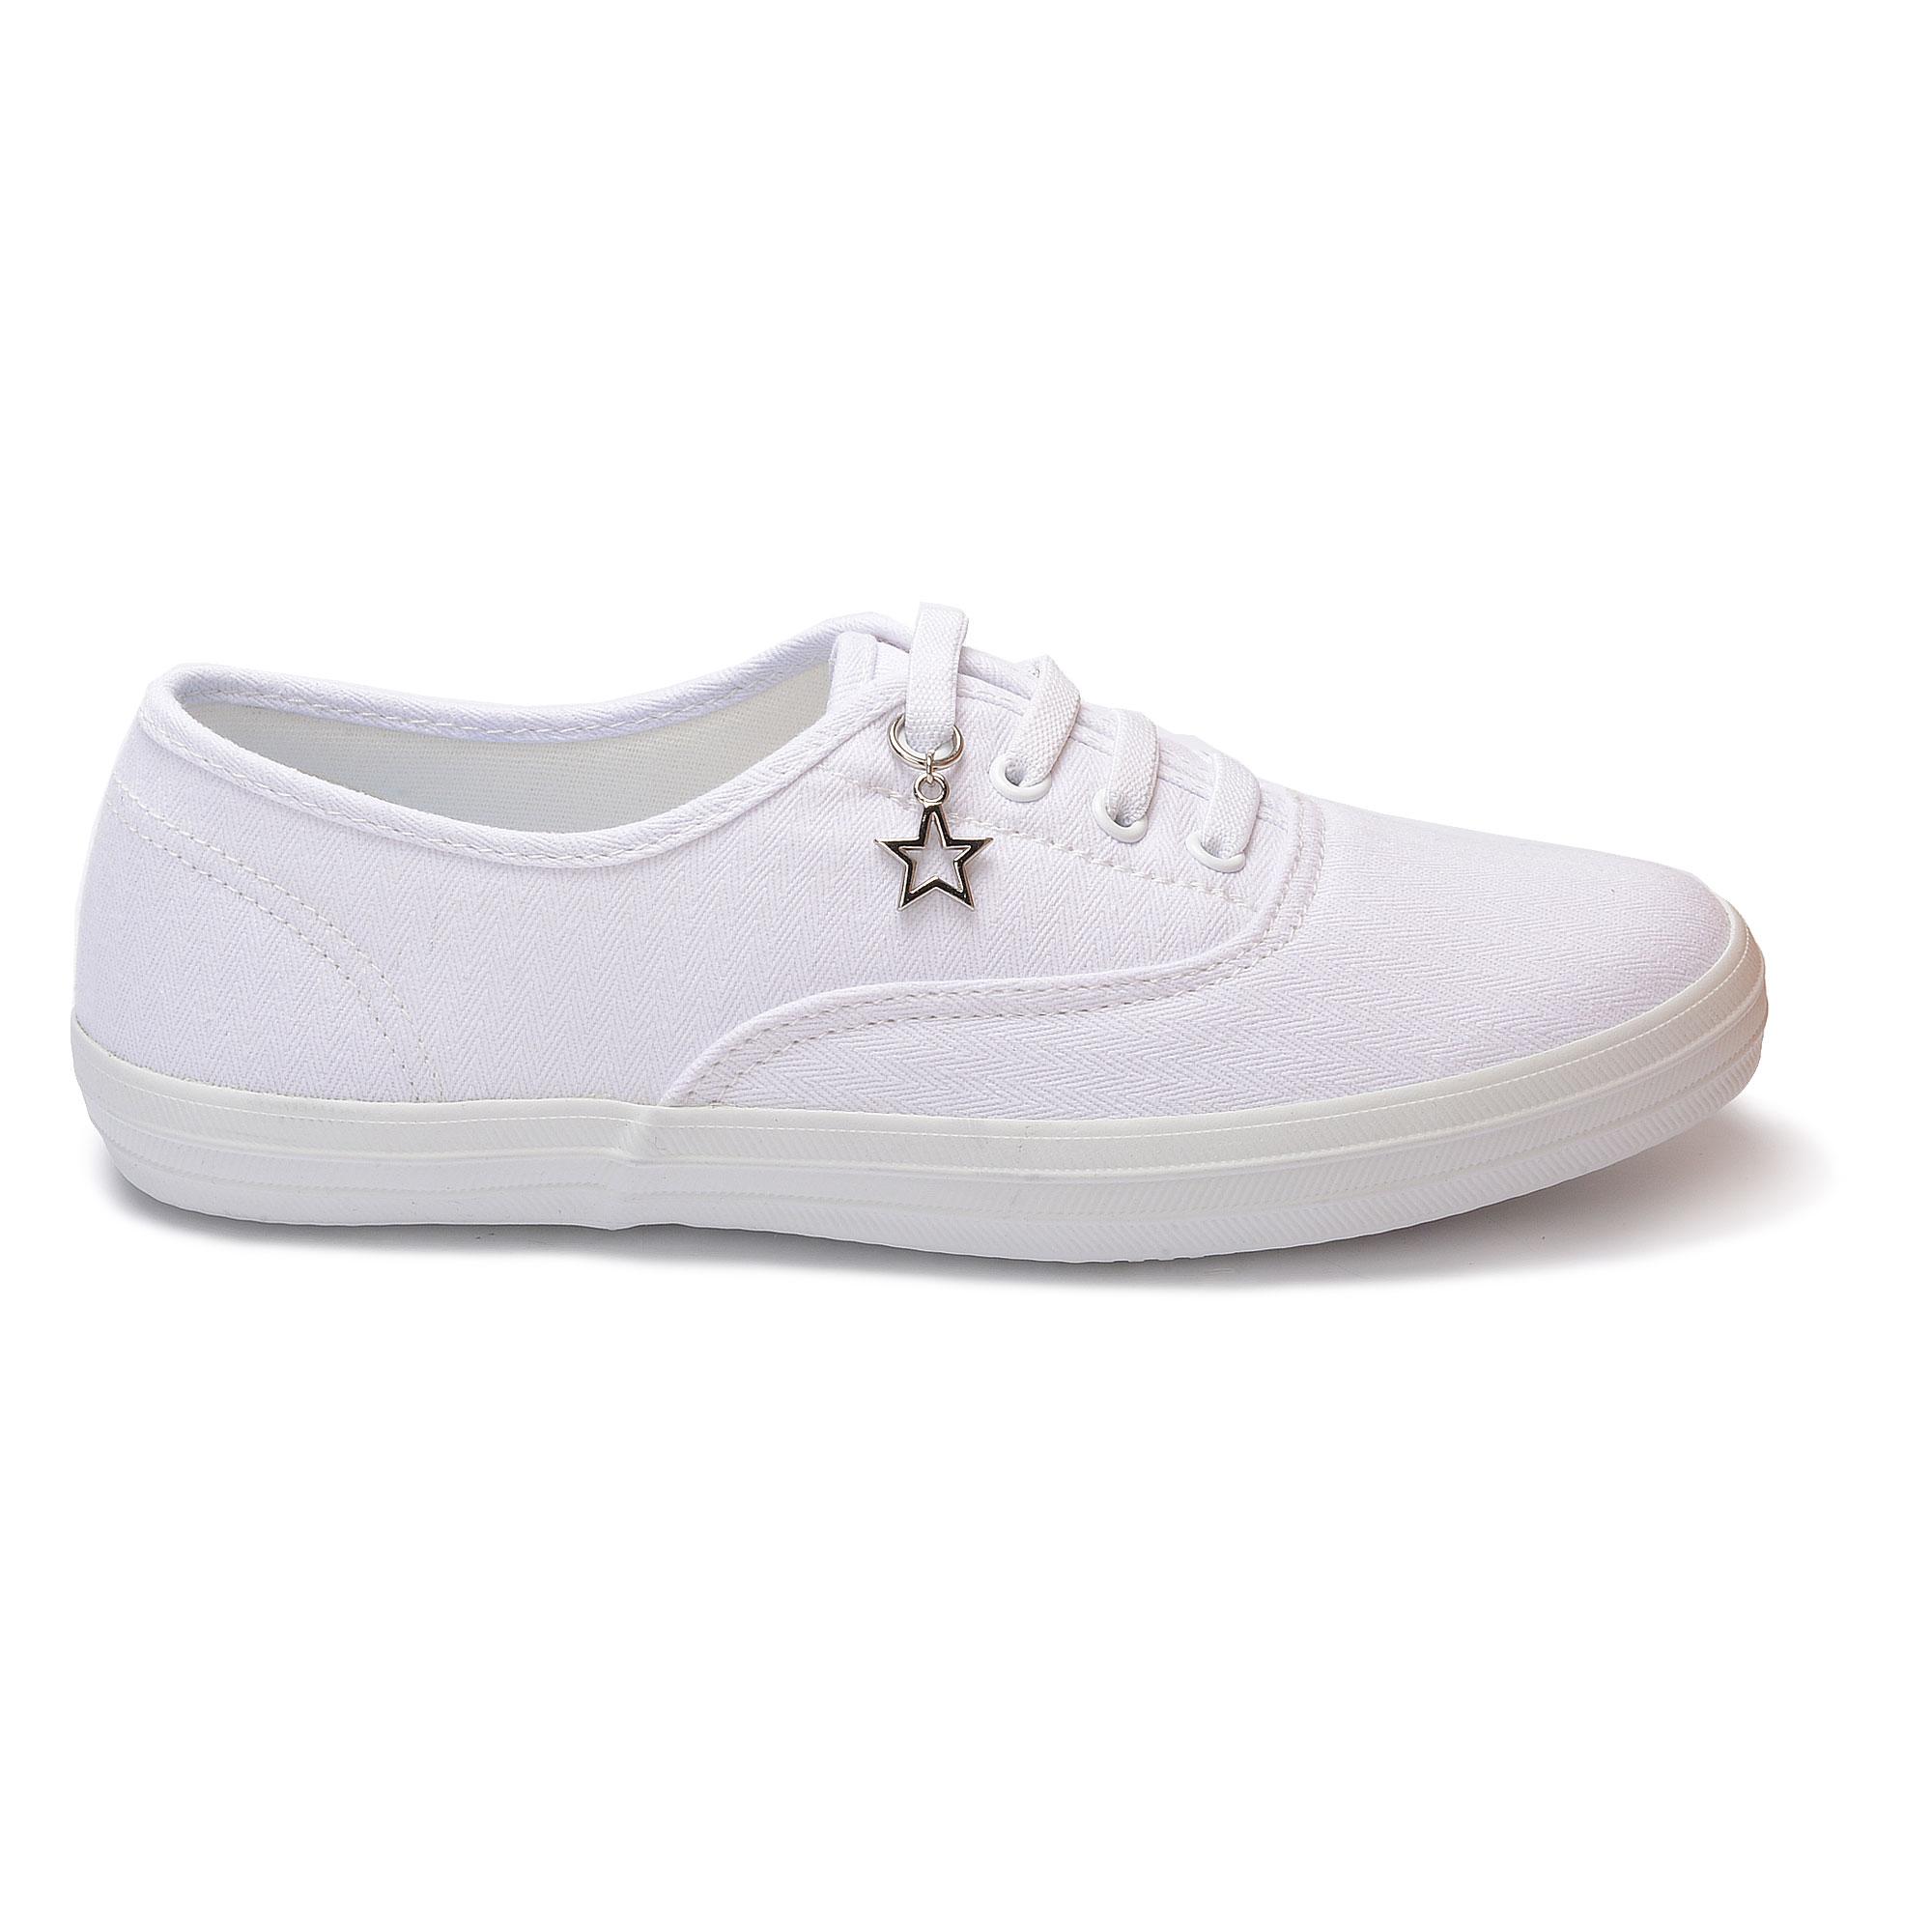 north star canvas shoes